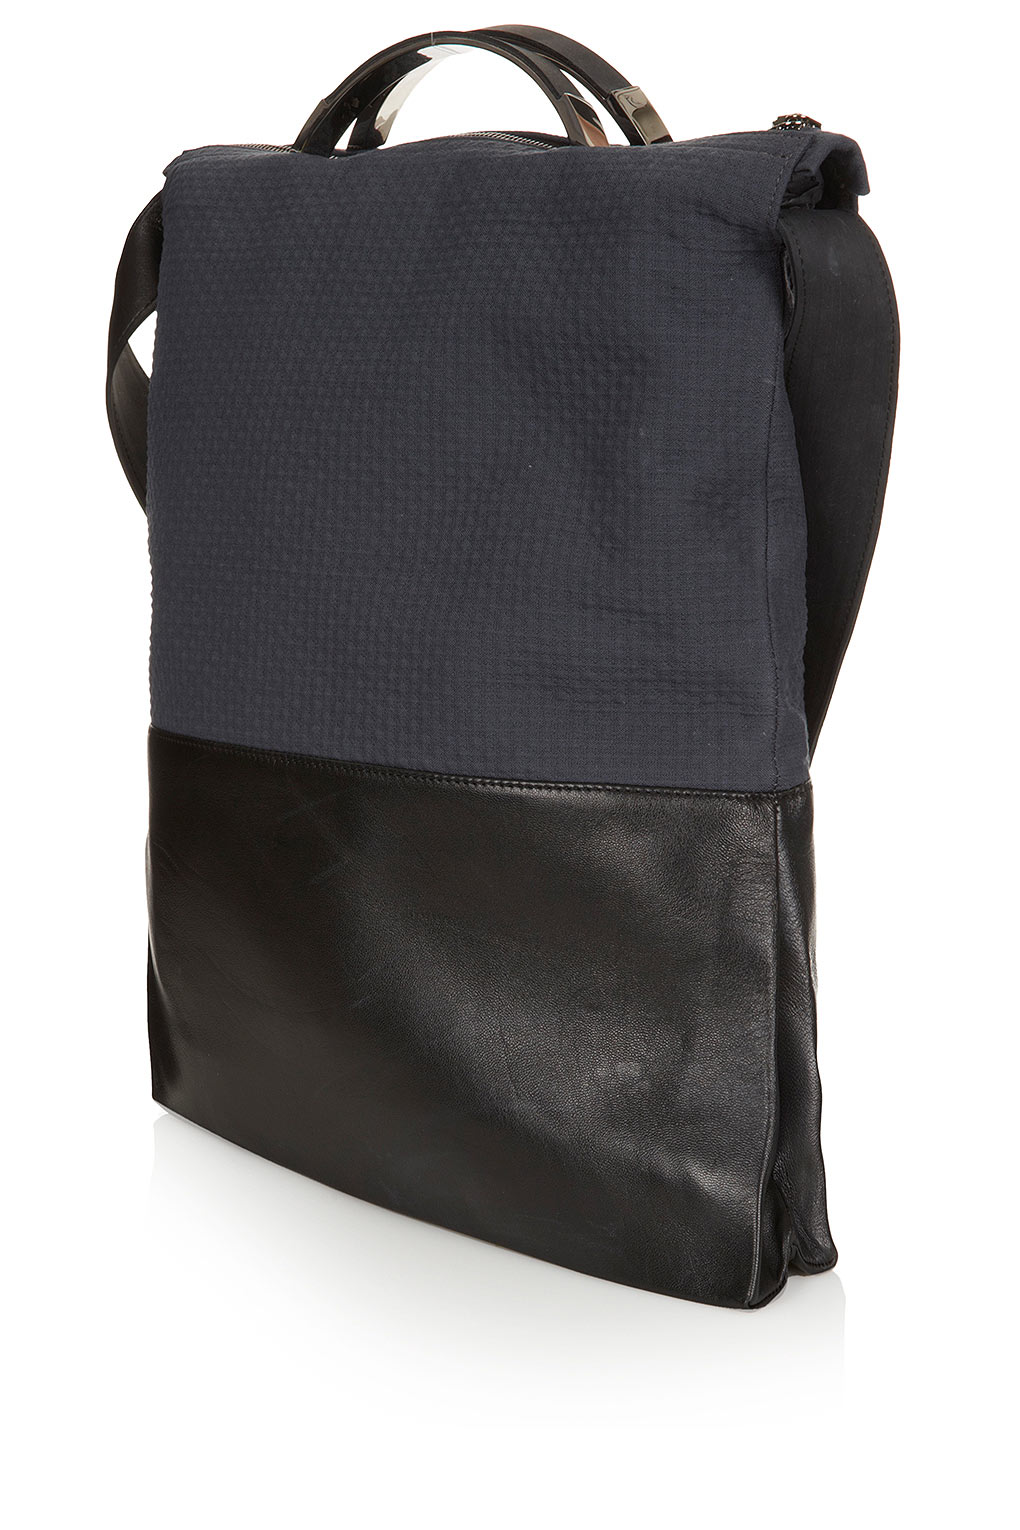 TOPSHOP Fold Over Tote Bag in Black - Lyst